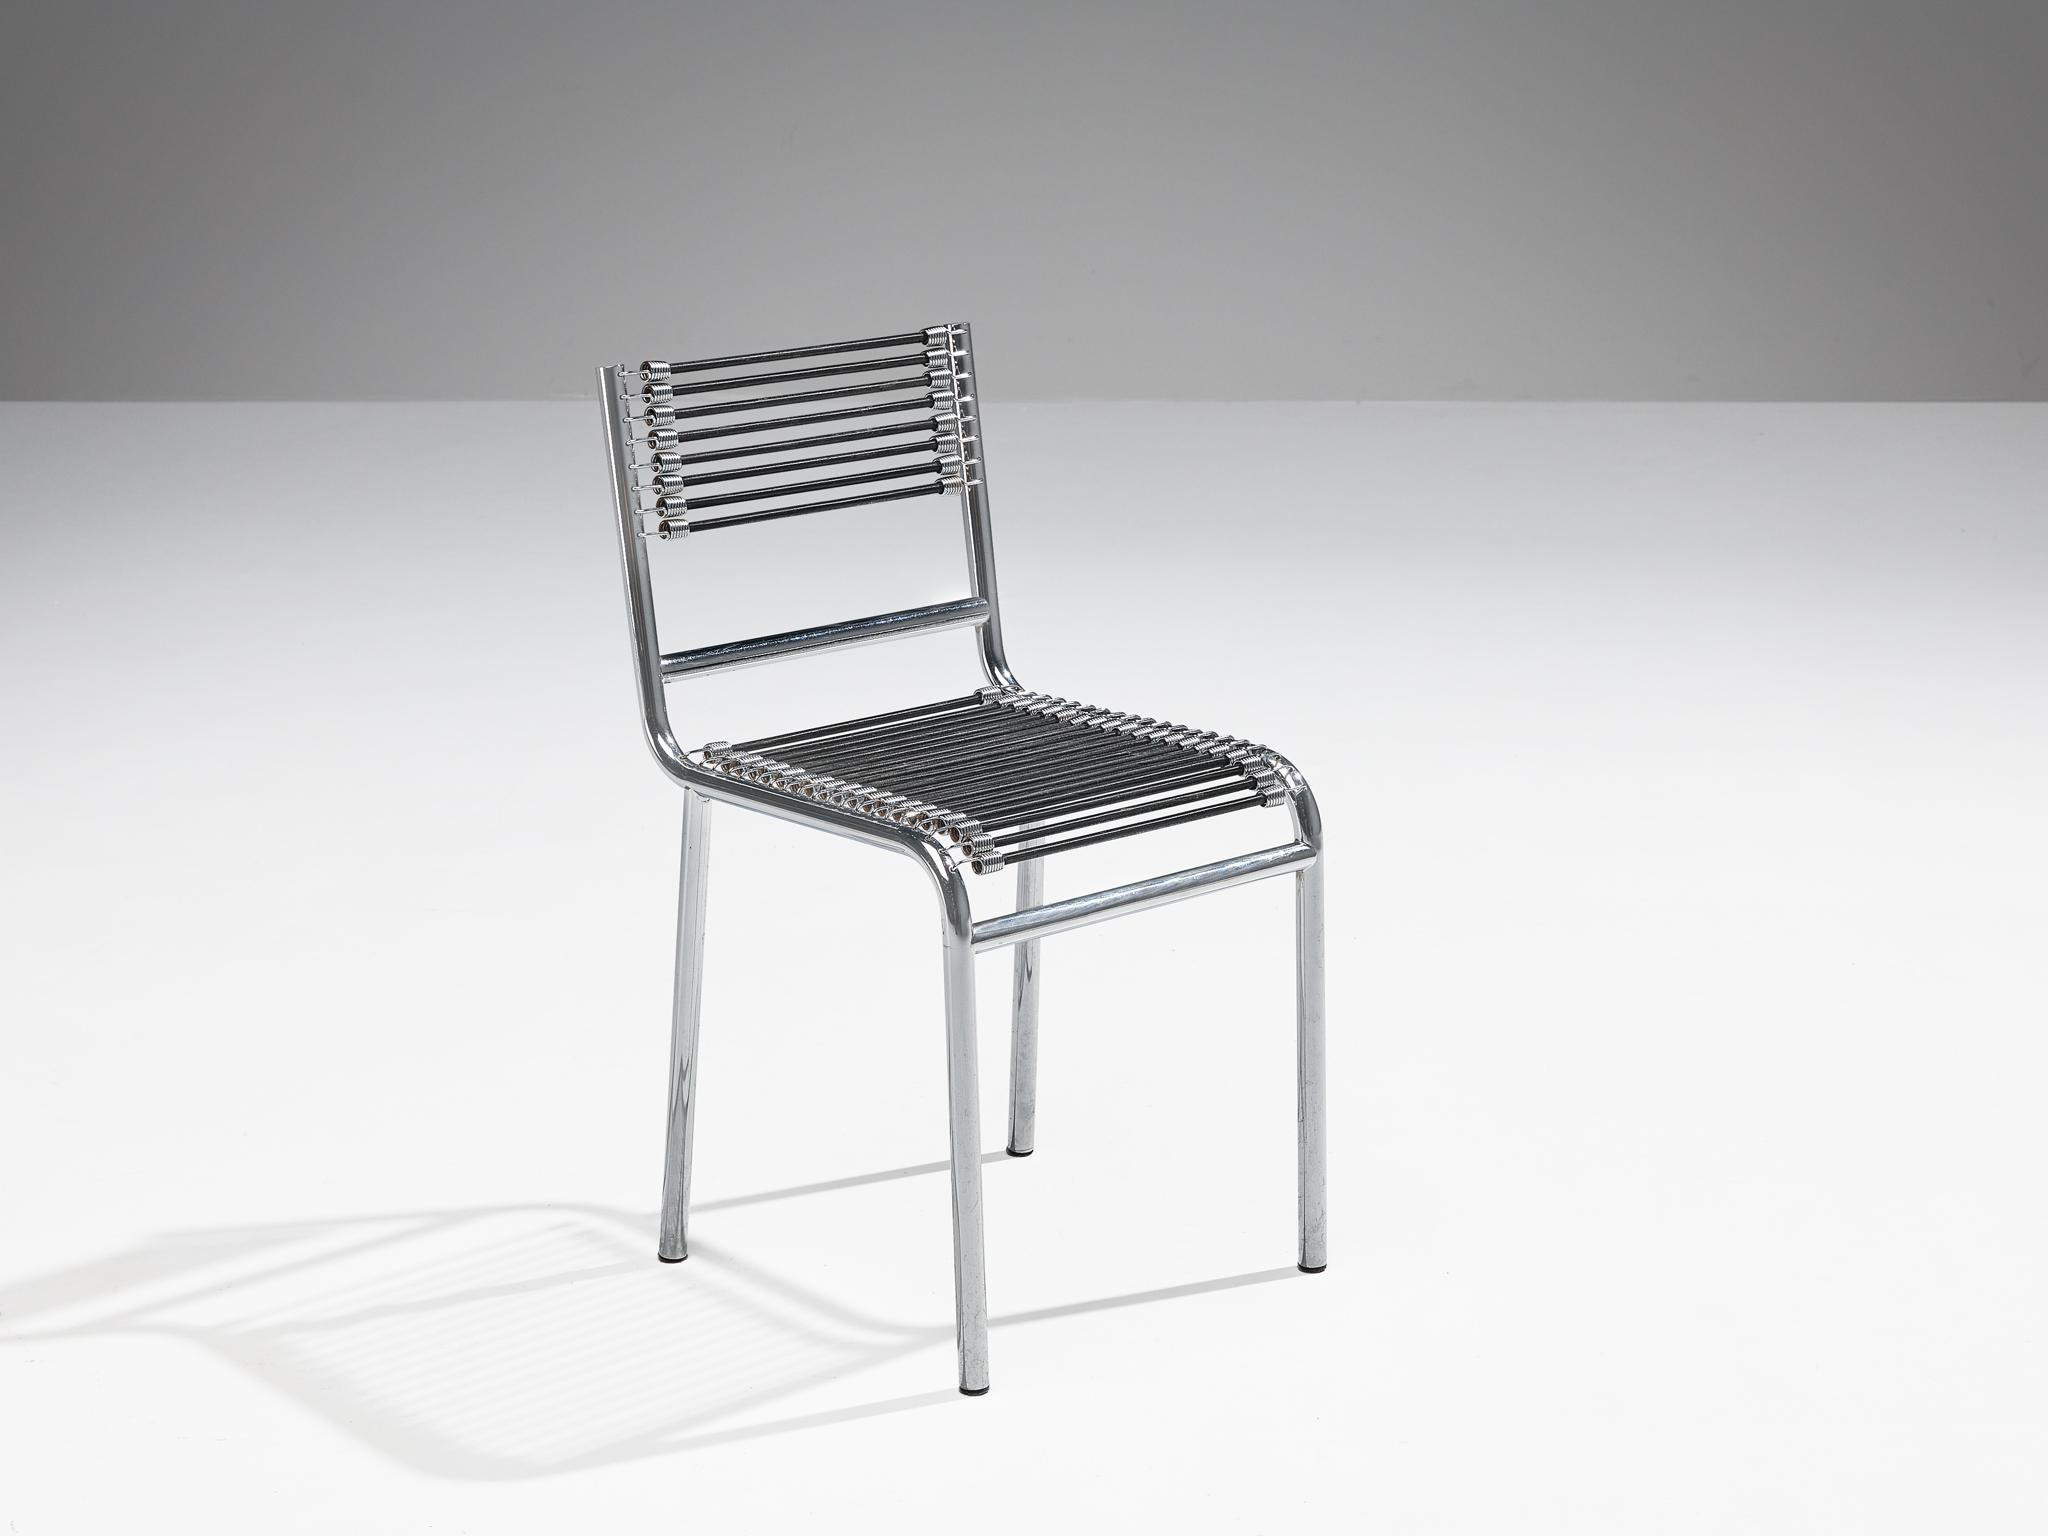 René Herbst, 'Sandows' chair, model '101', chrome-plated steel, elastic rope, France, design 1928, produced 1970s.

The 'Sandows' chair epitomizes the industrial advancements of the twenties, featuring a tubular steel construction integrated with